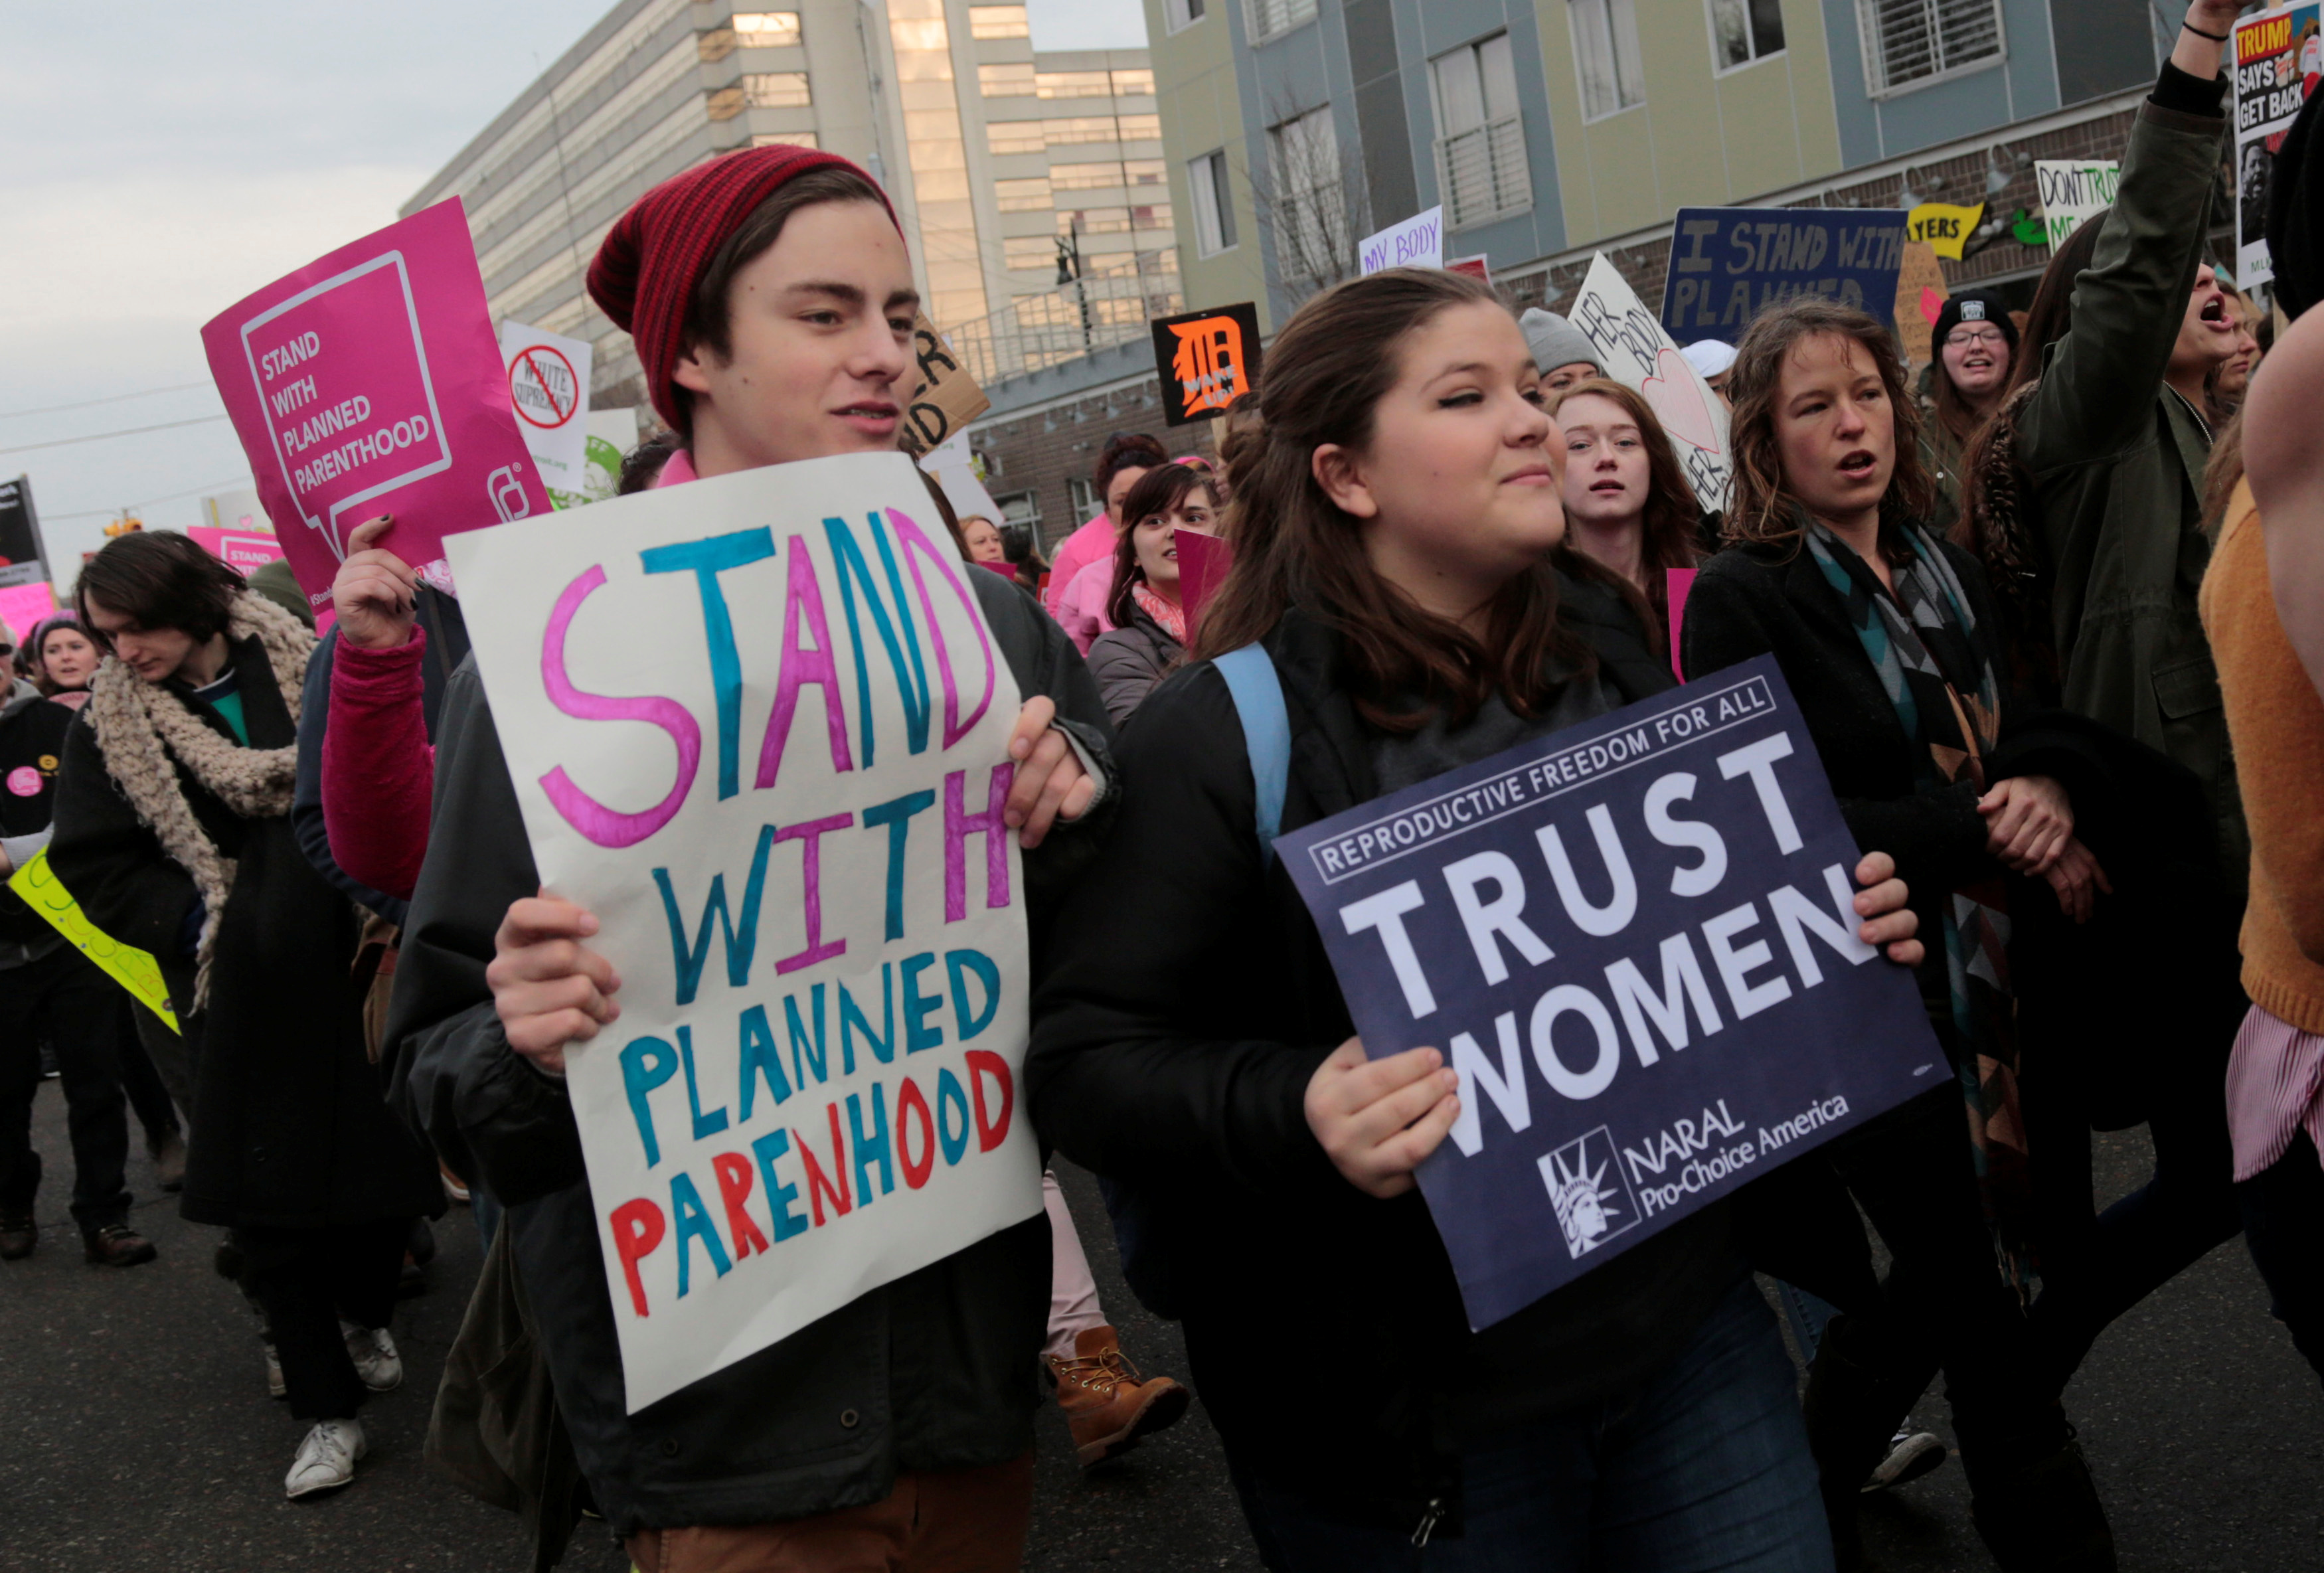 Pro-Choice supporters of Planned Parenthood rally outside a Planned Parenthood clinic in Detroit, Michigan